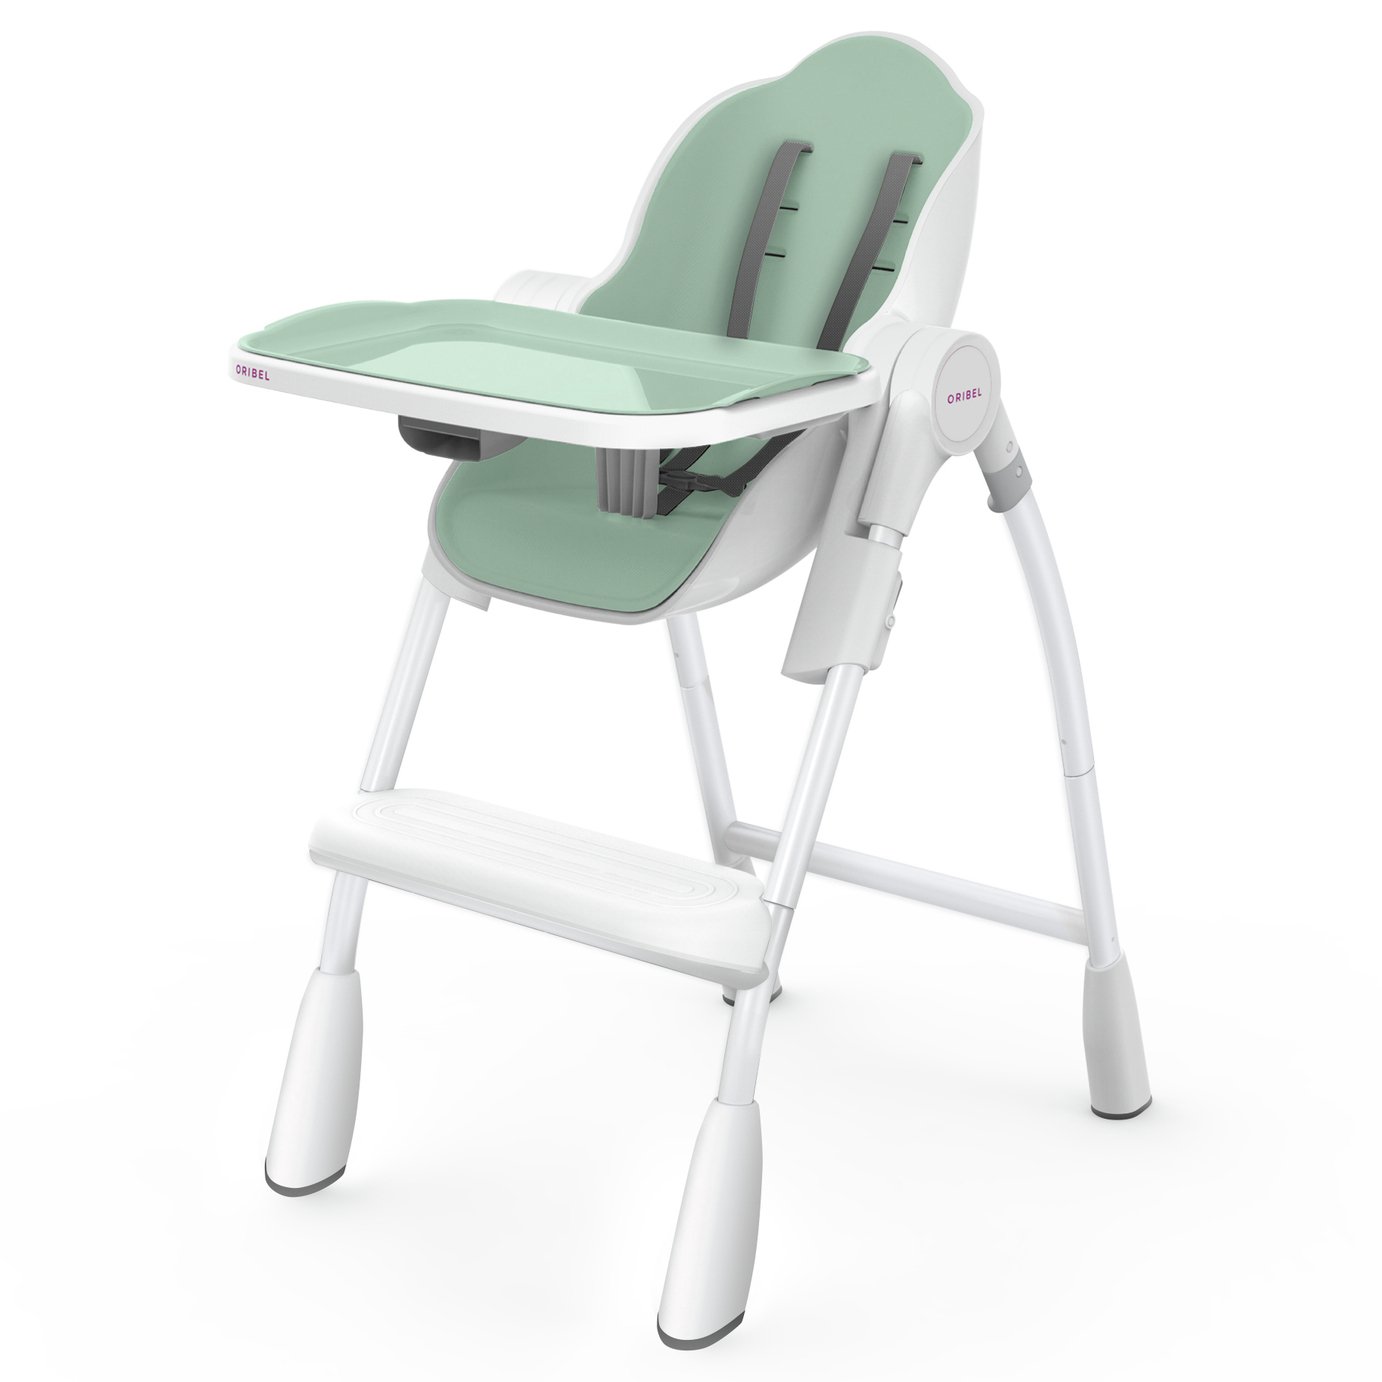 Oribel Cocoon High Chair Review